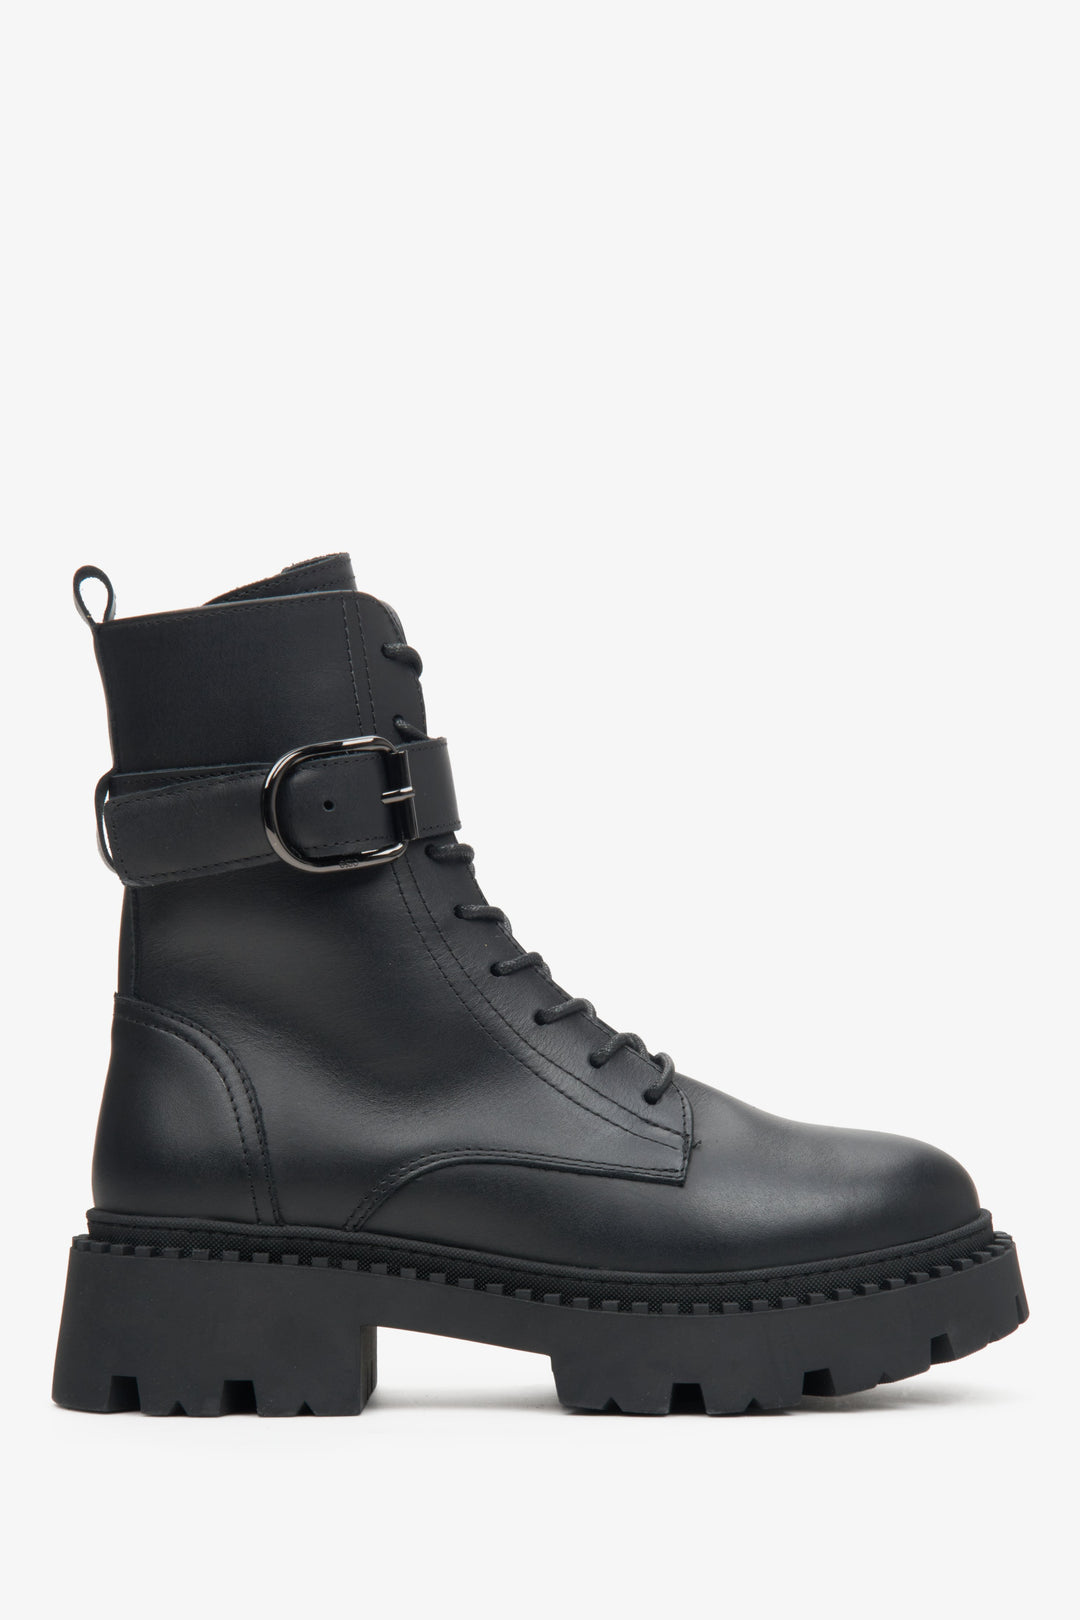 Women's Black Winter Boots made of Genuine Leather with a Decorative Strap Estro ER00113295.